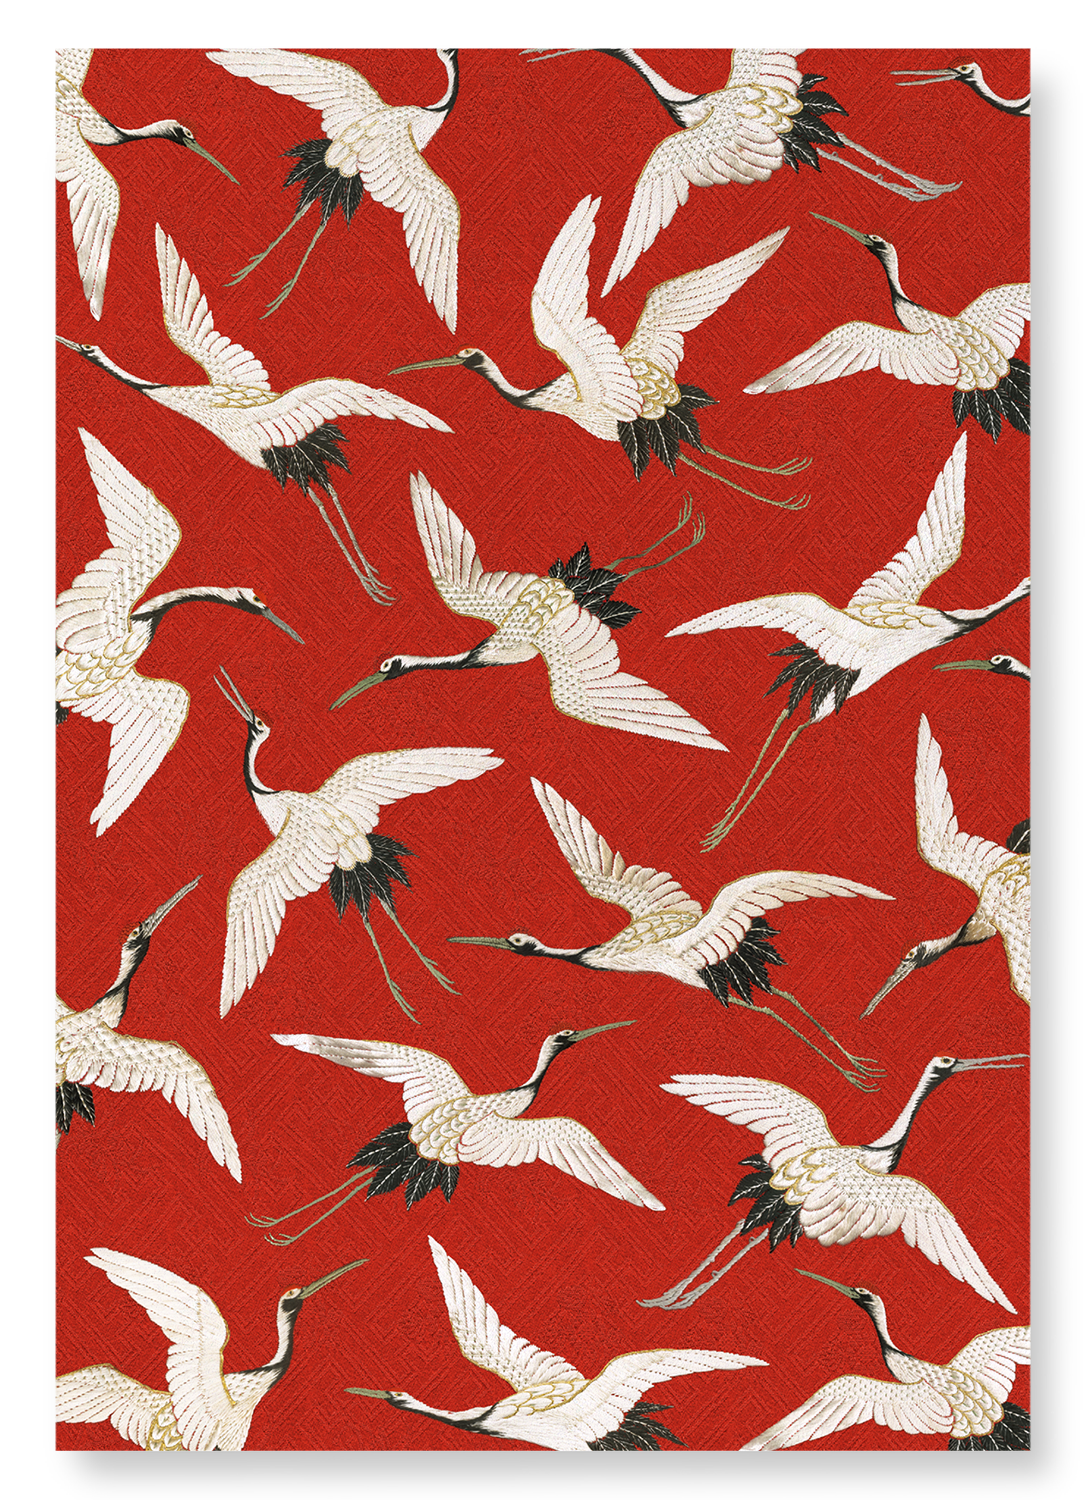 CRANE EMBROIDERY ON RED : Pattern Art Print